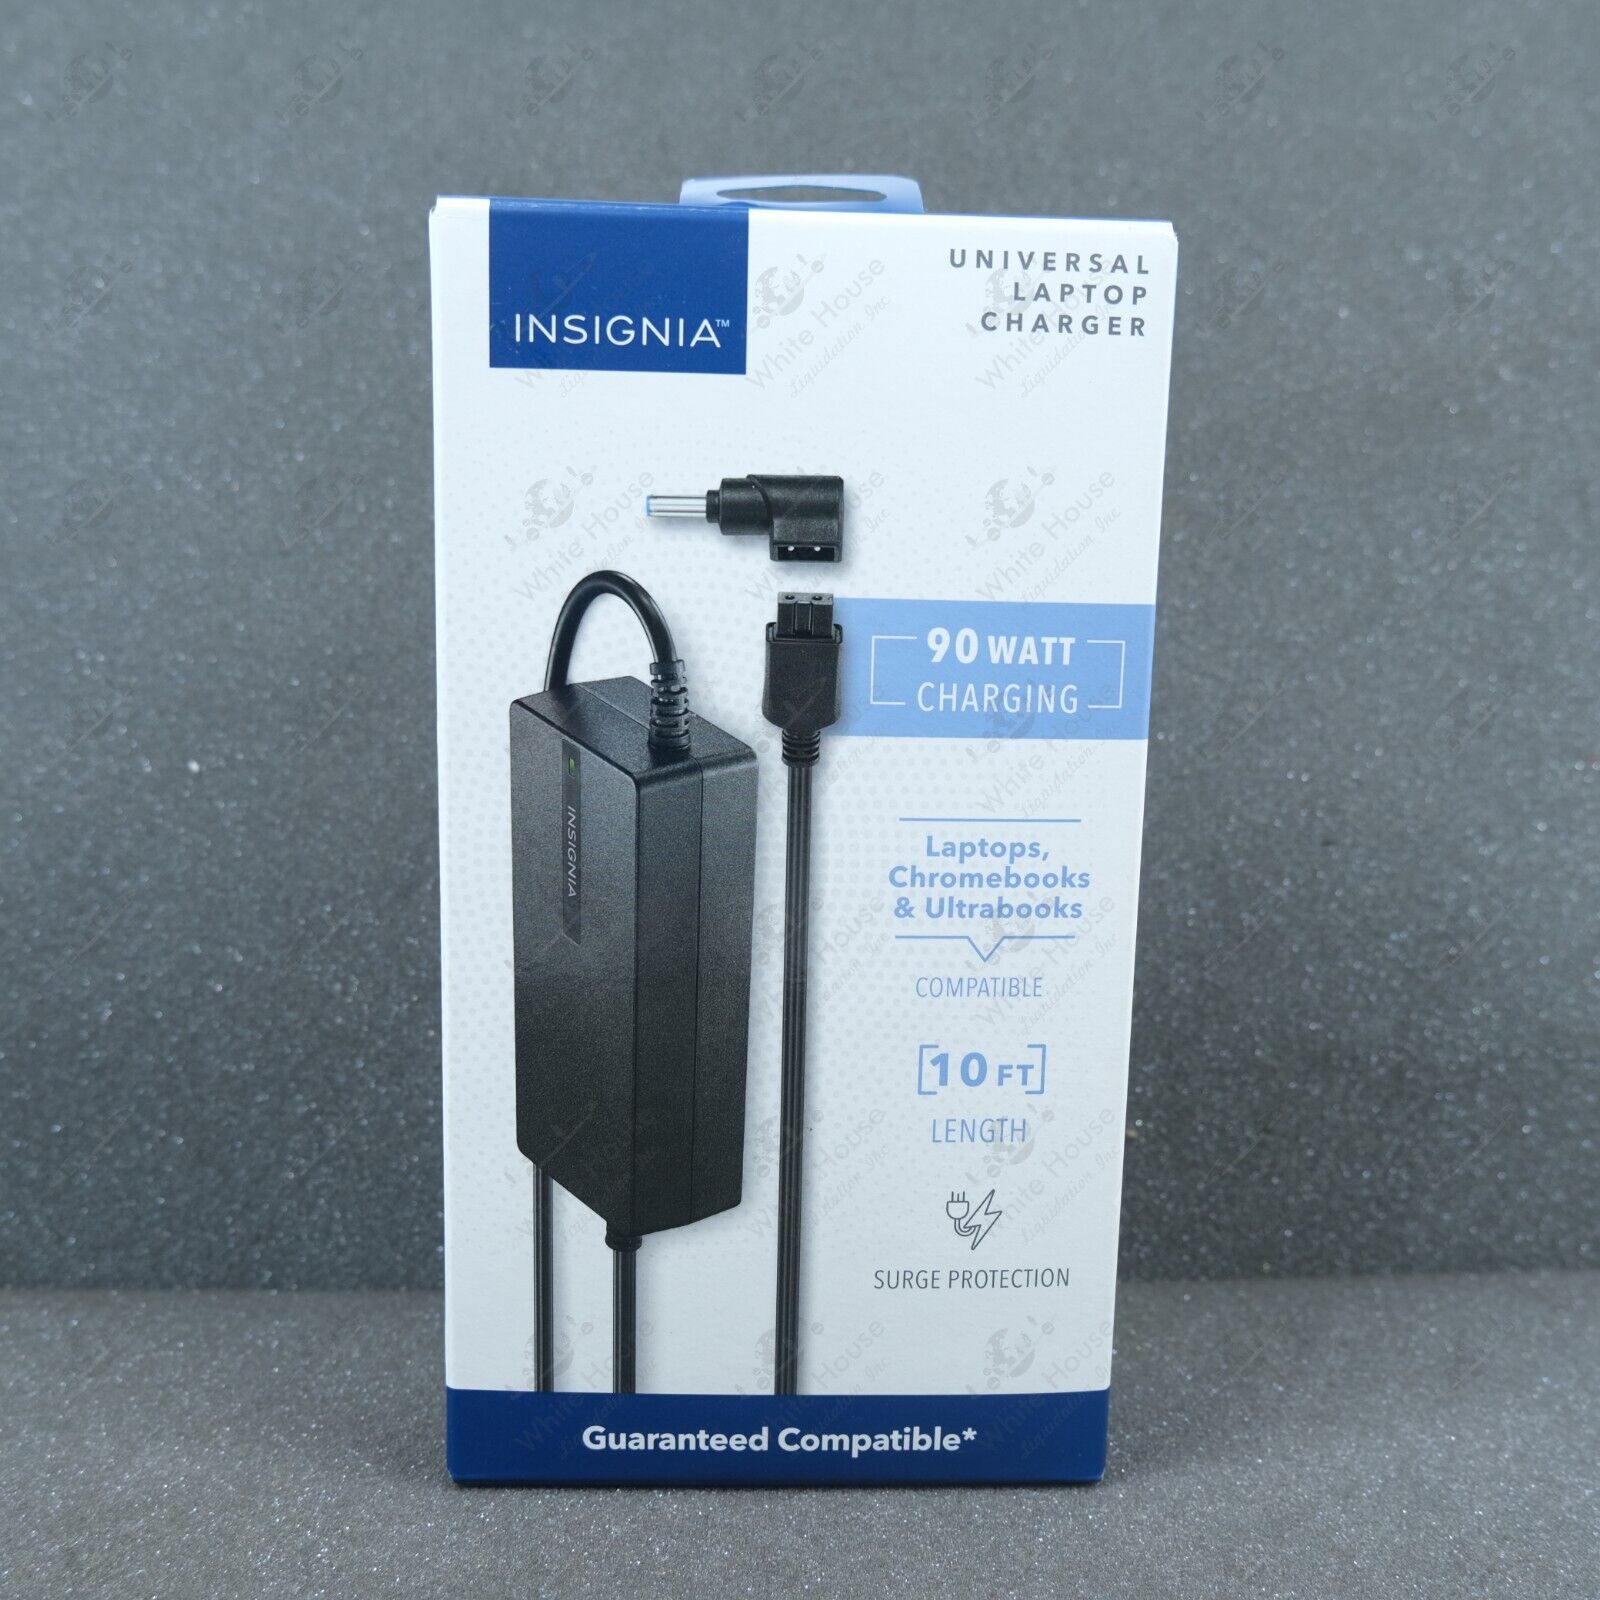 Insignia- Universal 90W Laptop Charger - Black (262128)